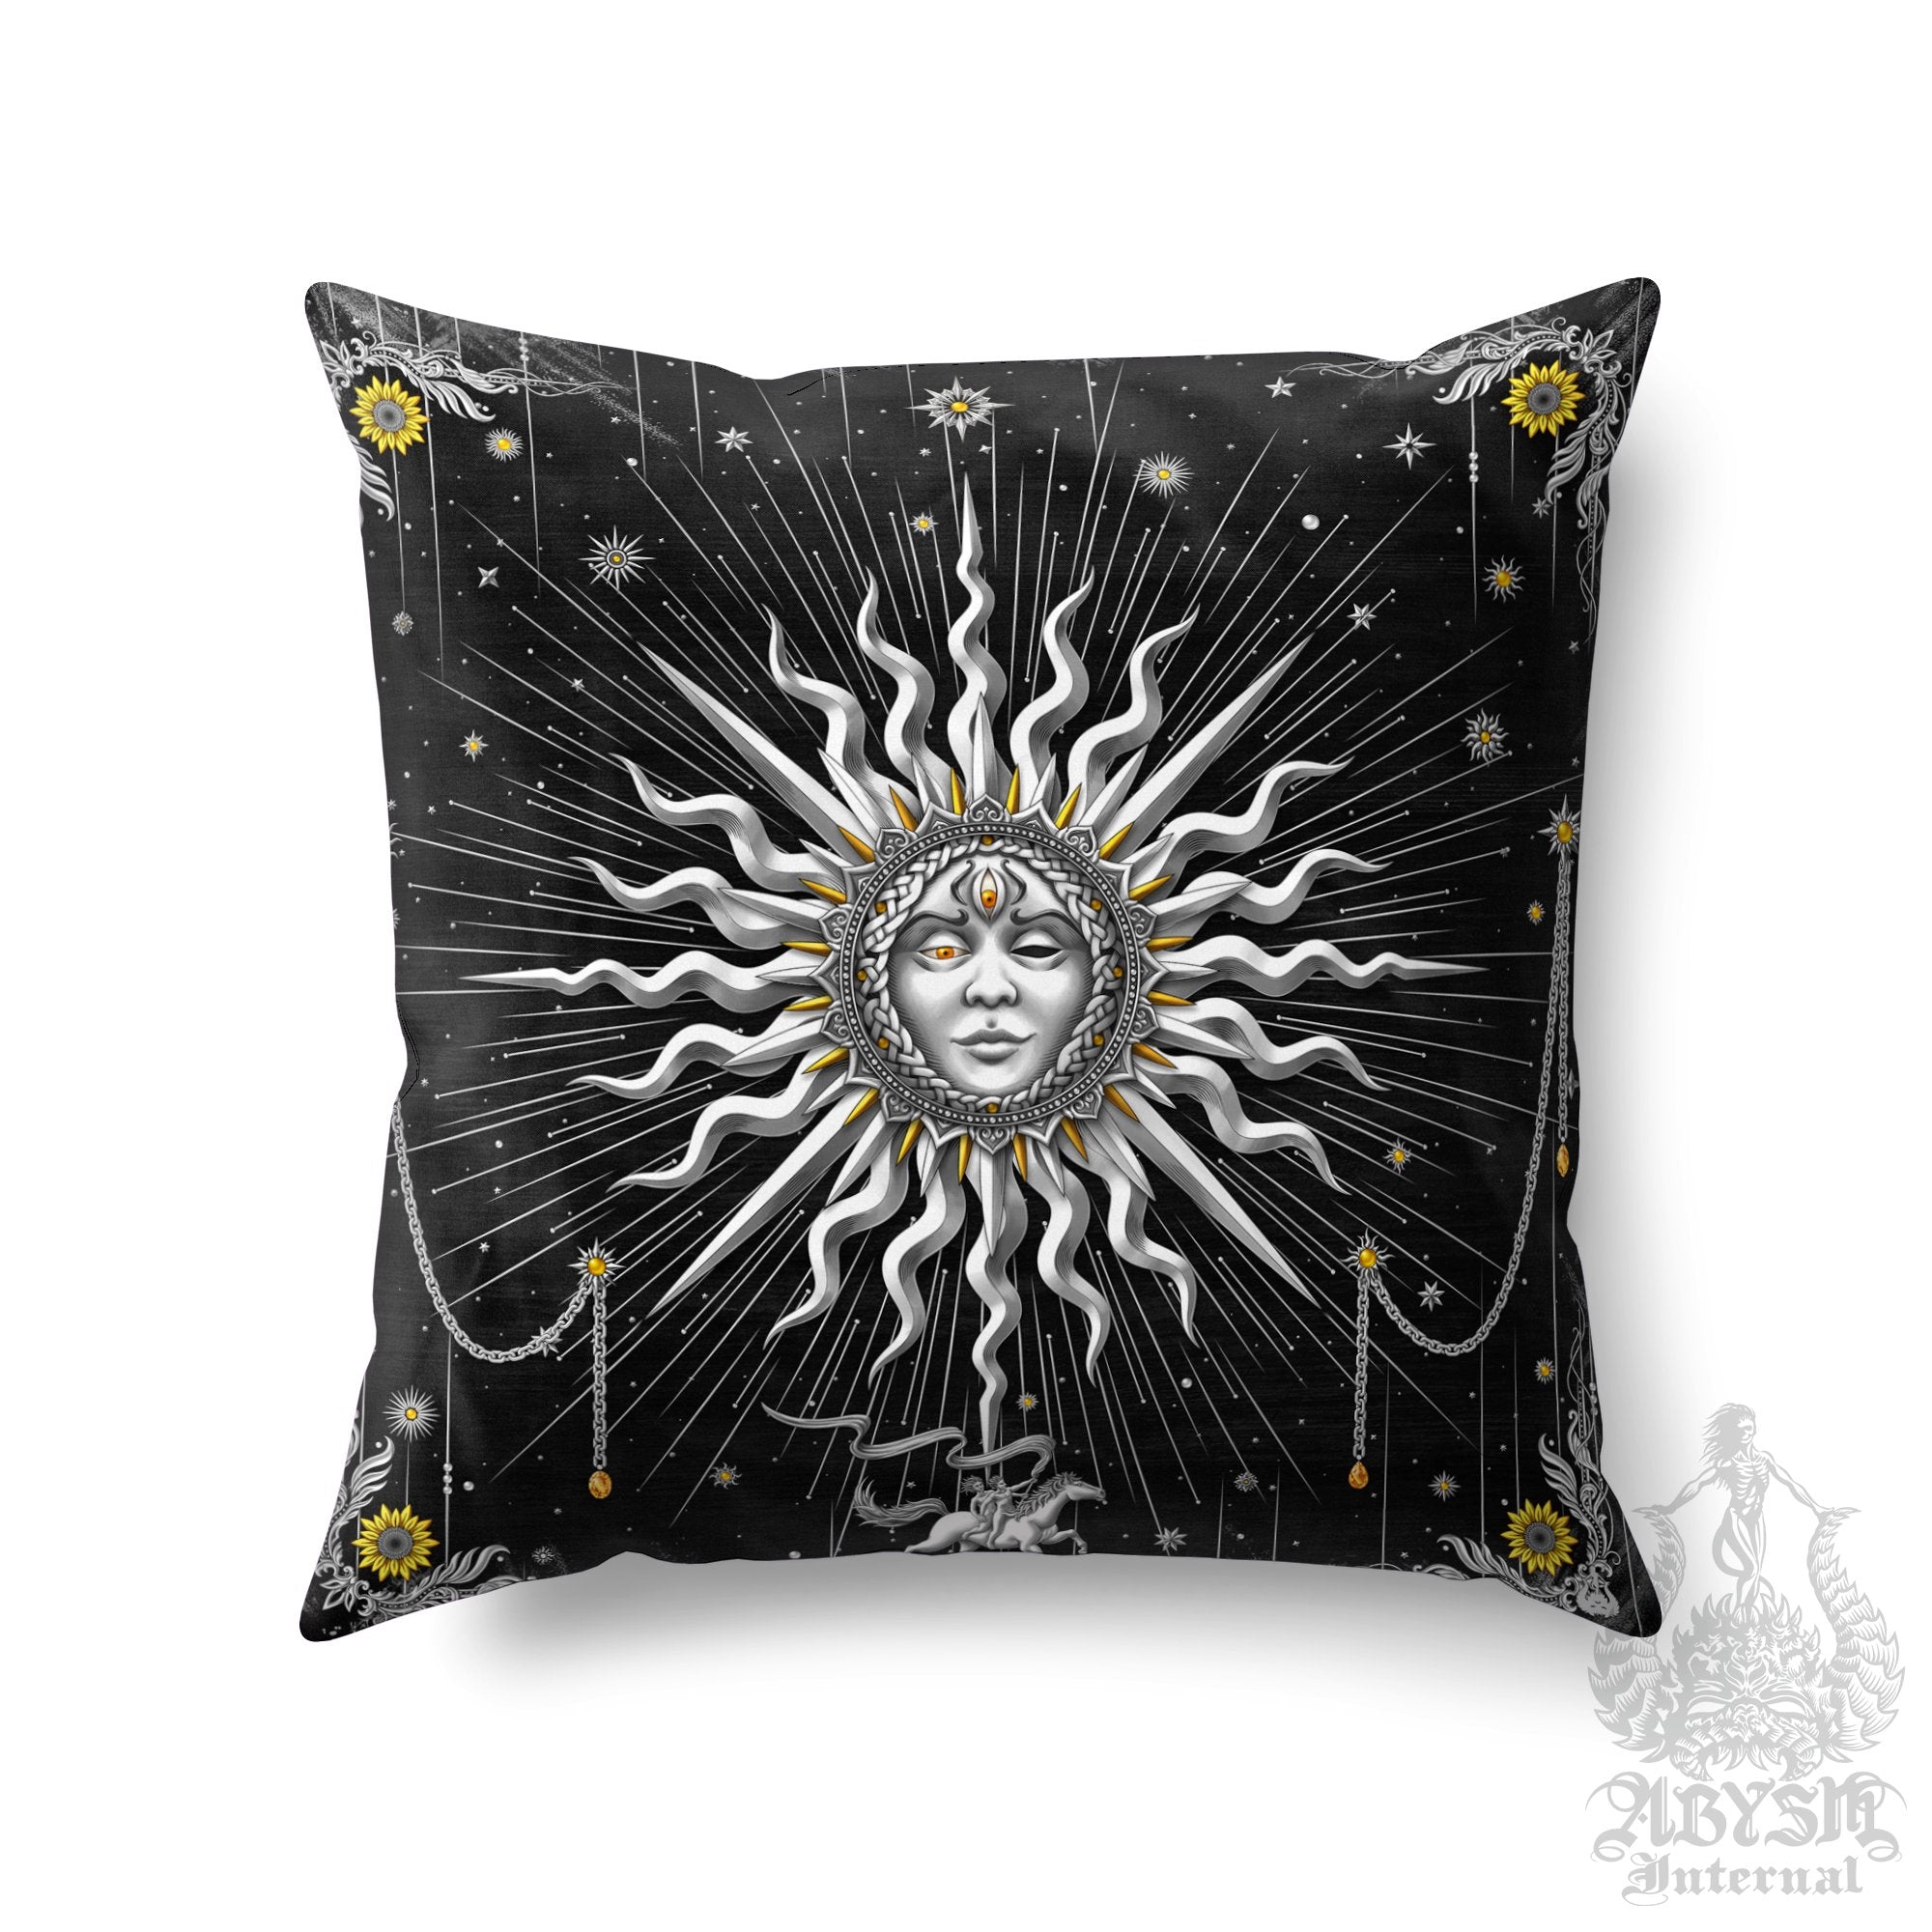 Silver Sun Throw Pillow, Boho Decorative Accent Pillow, Square Cushion Cover, Arcana Tarot Art, Indie Home, Magic & Fortune Room Decor - 7 Colors - Abysm Internal